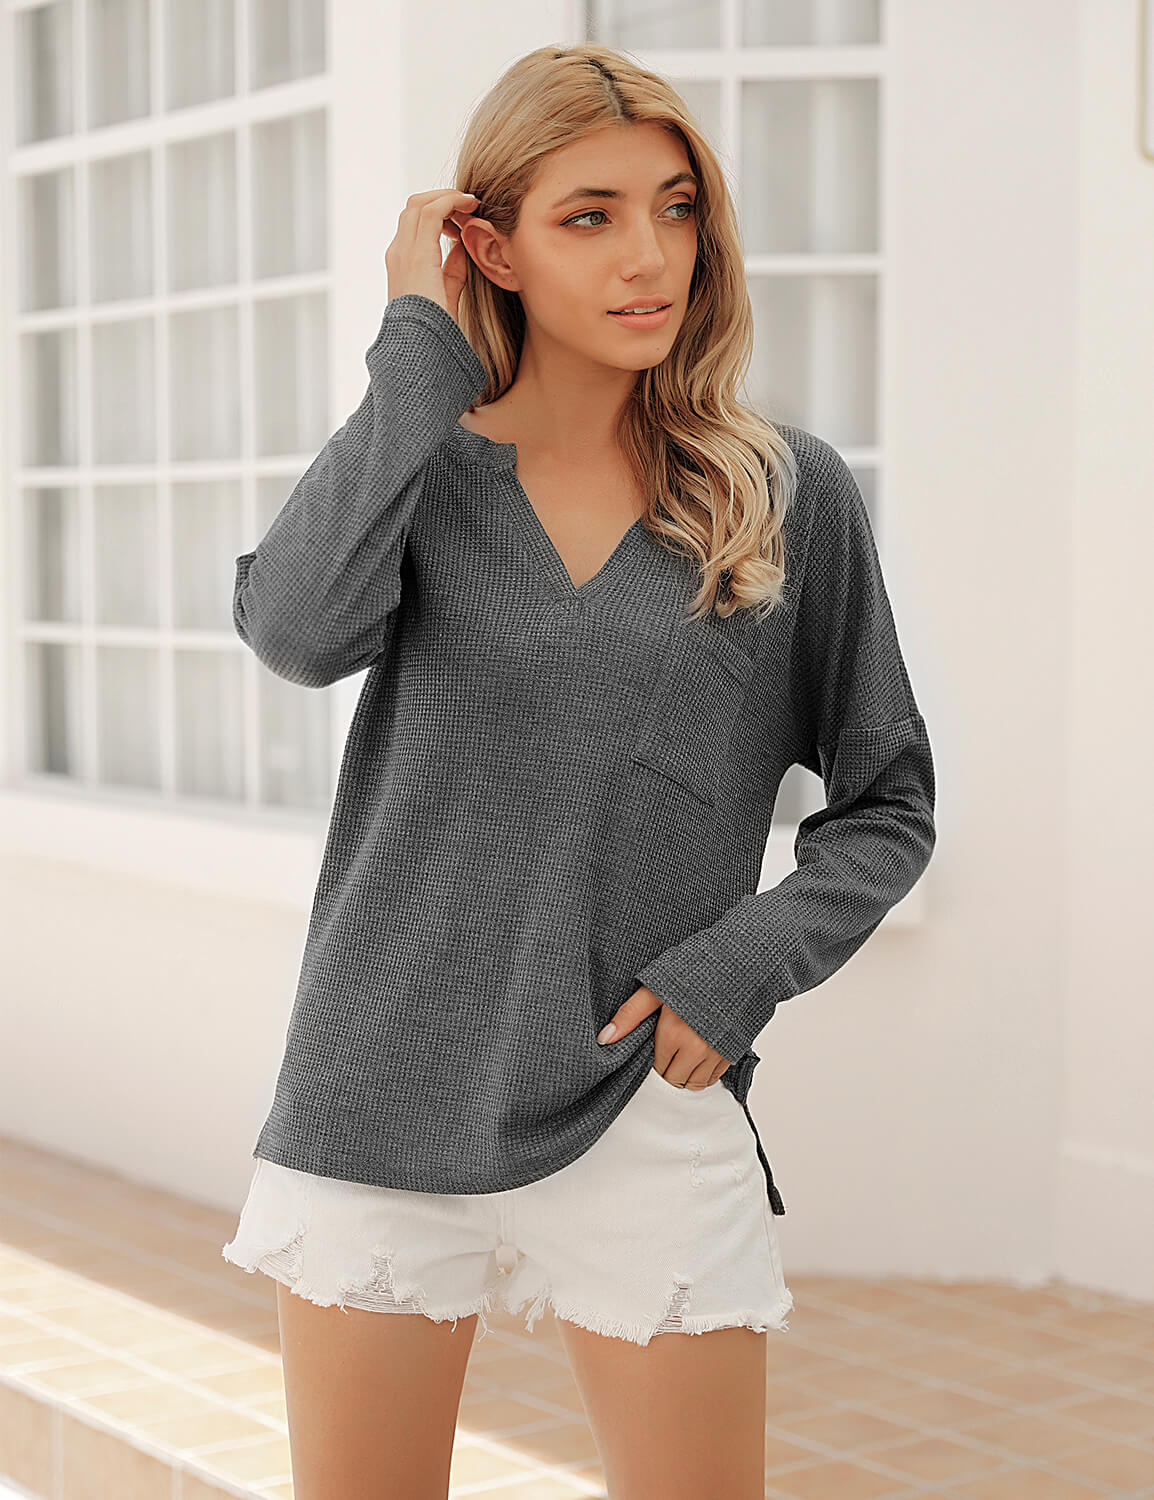 Blooming Jelly_Casual Knitted Long Sleeve Pocket T-Shirt_Gray_152694_07_2020 Women Autumn Wear Fashion_Tops_T-Shirt